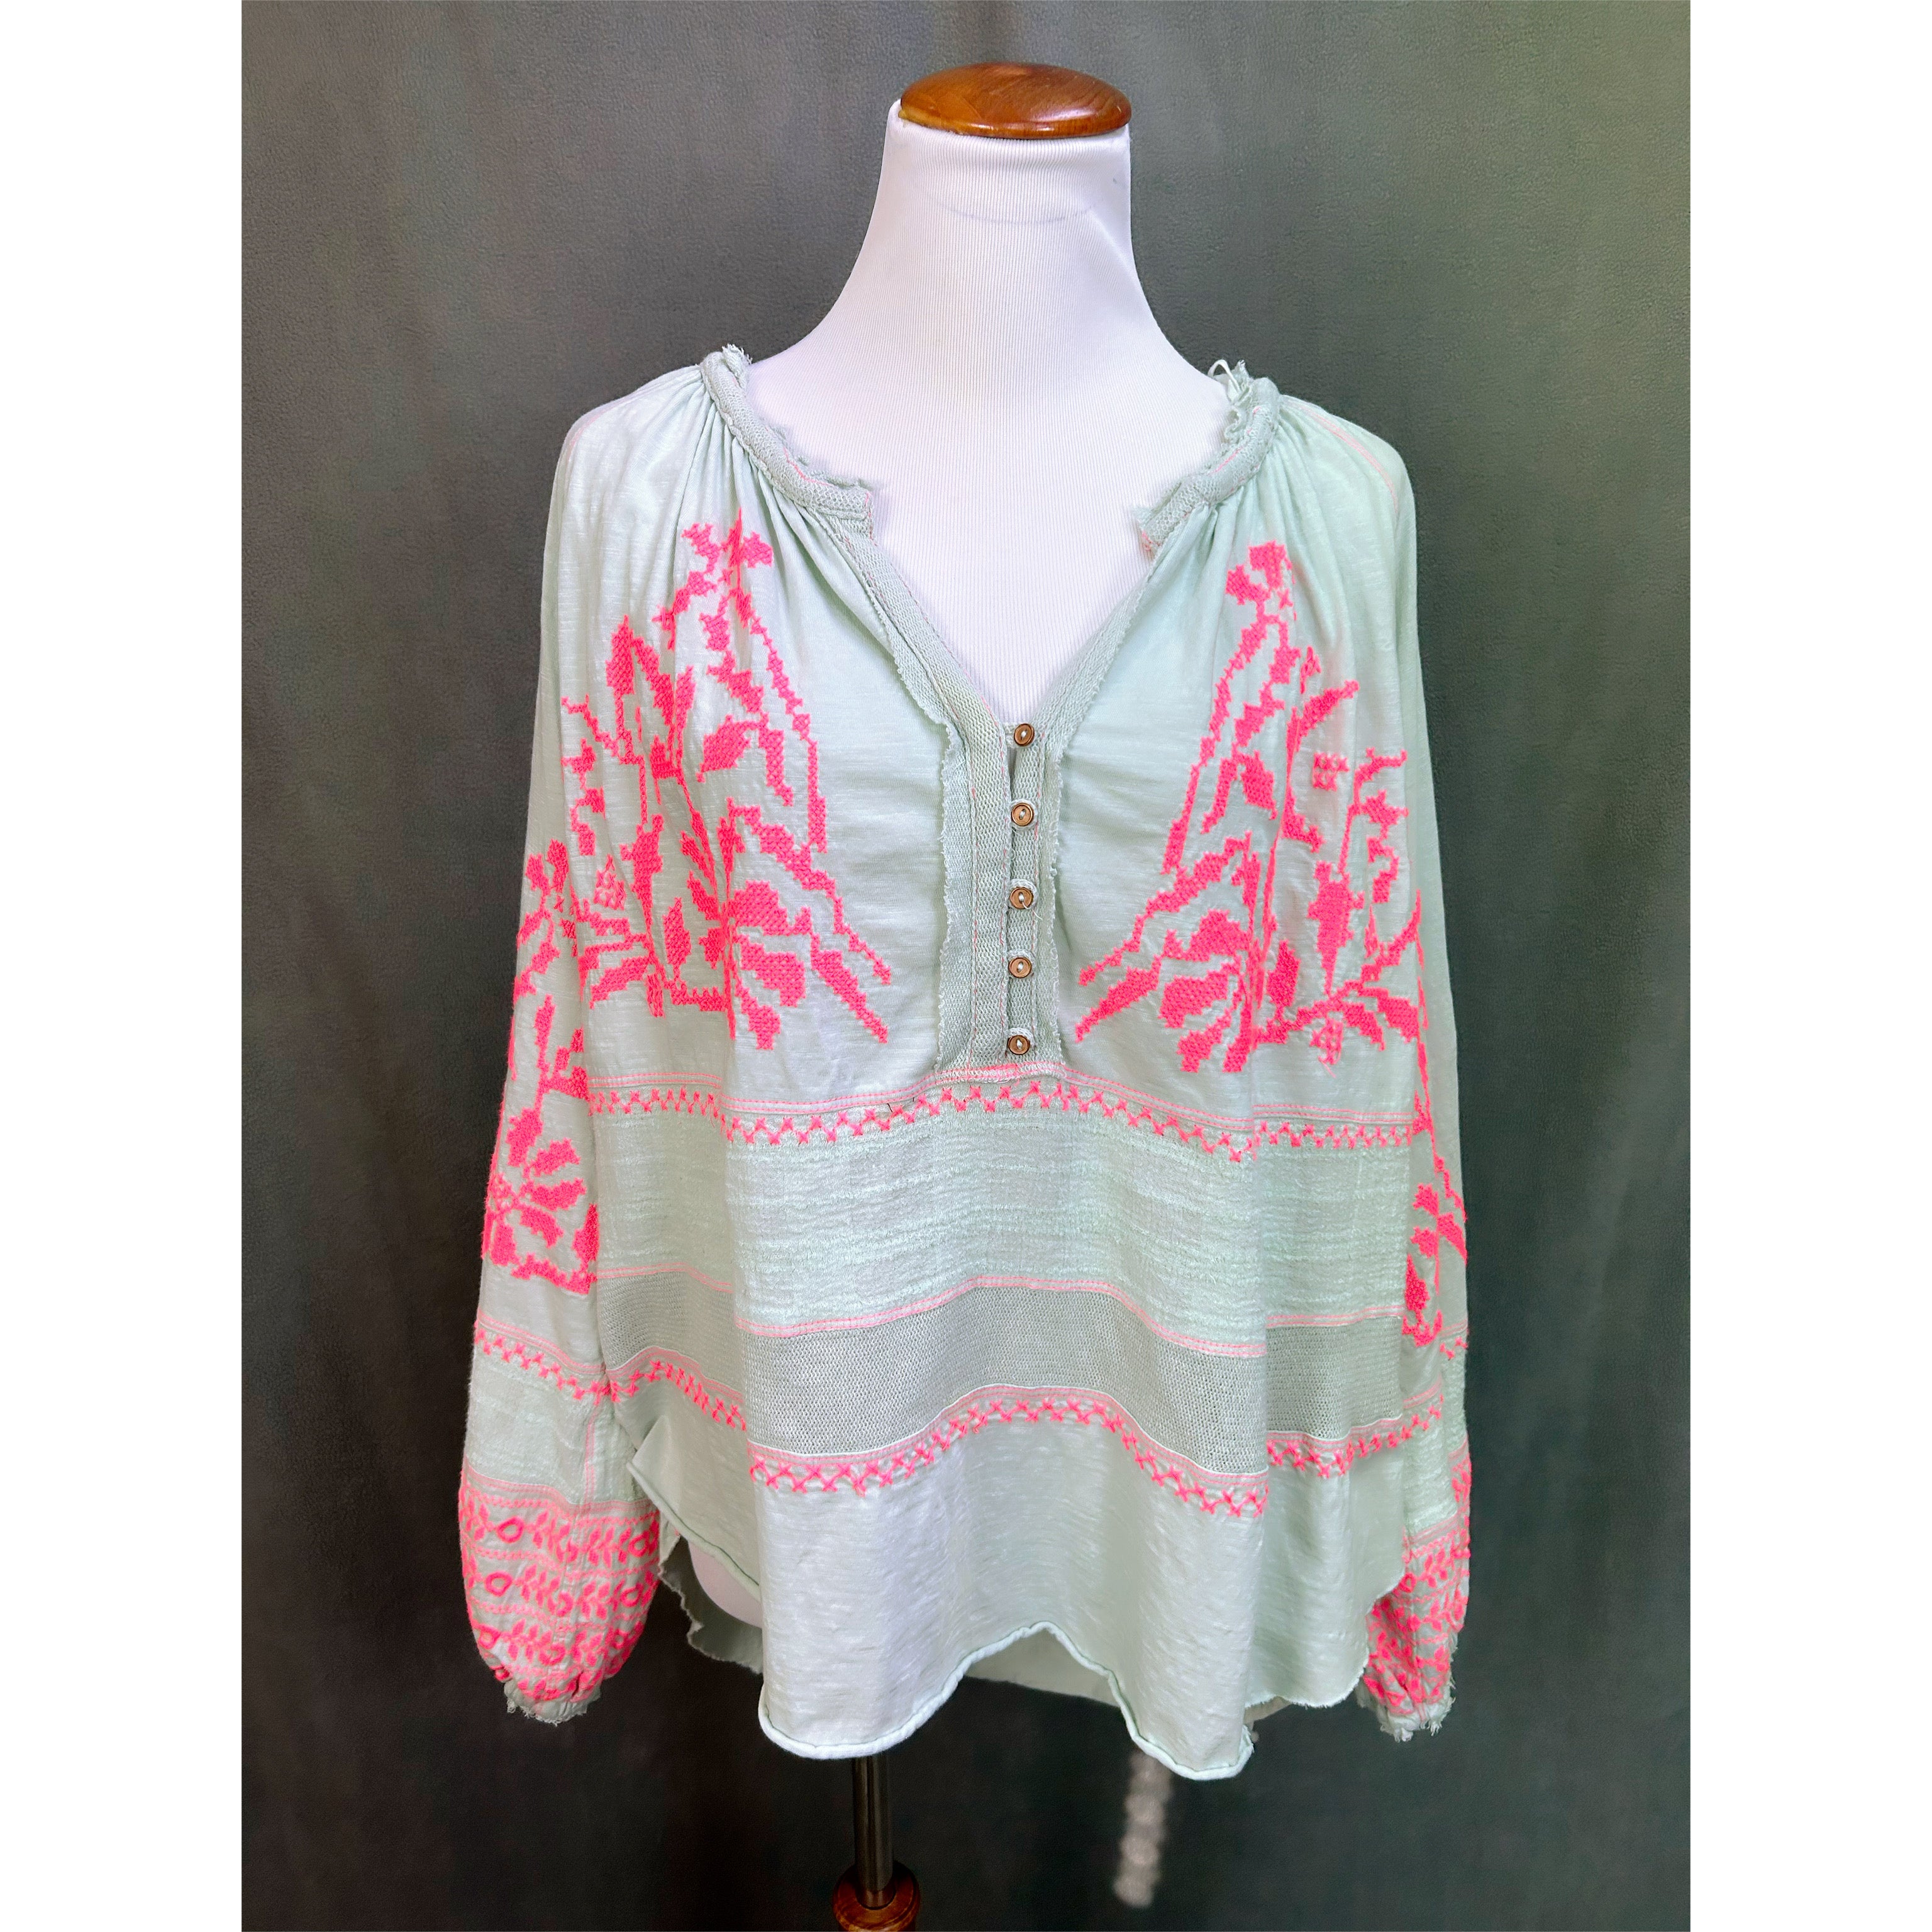 Free People mint and hot pink top, size S